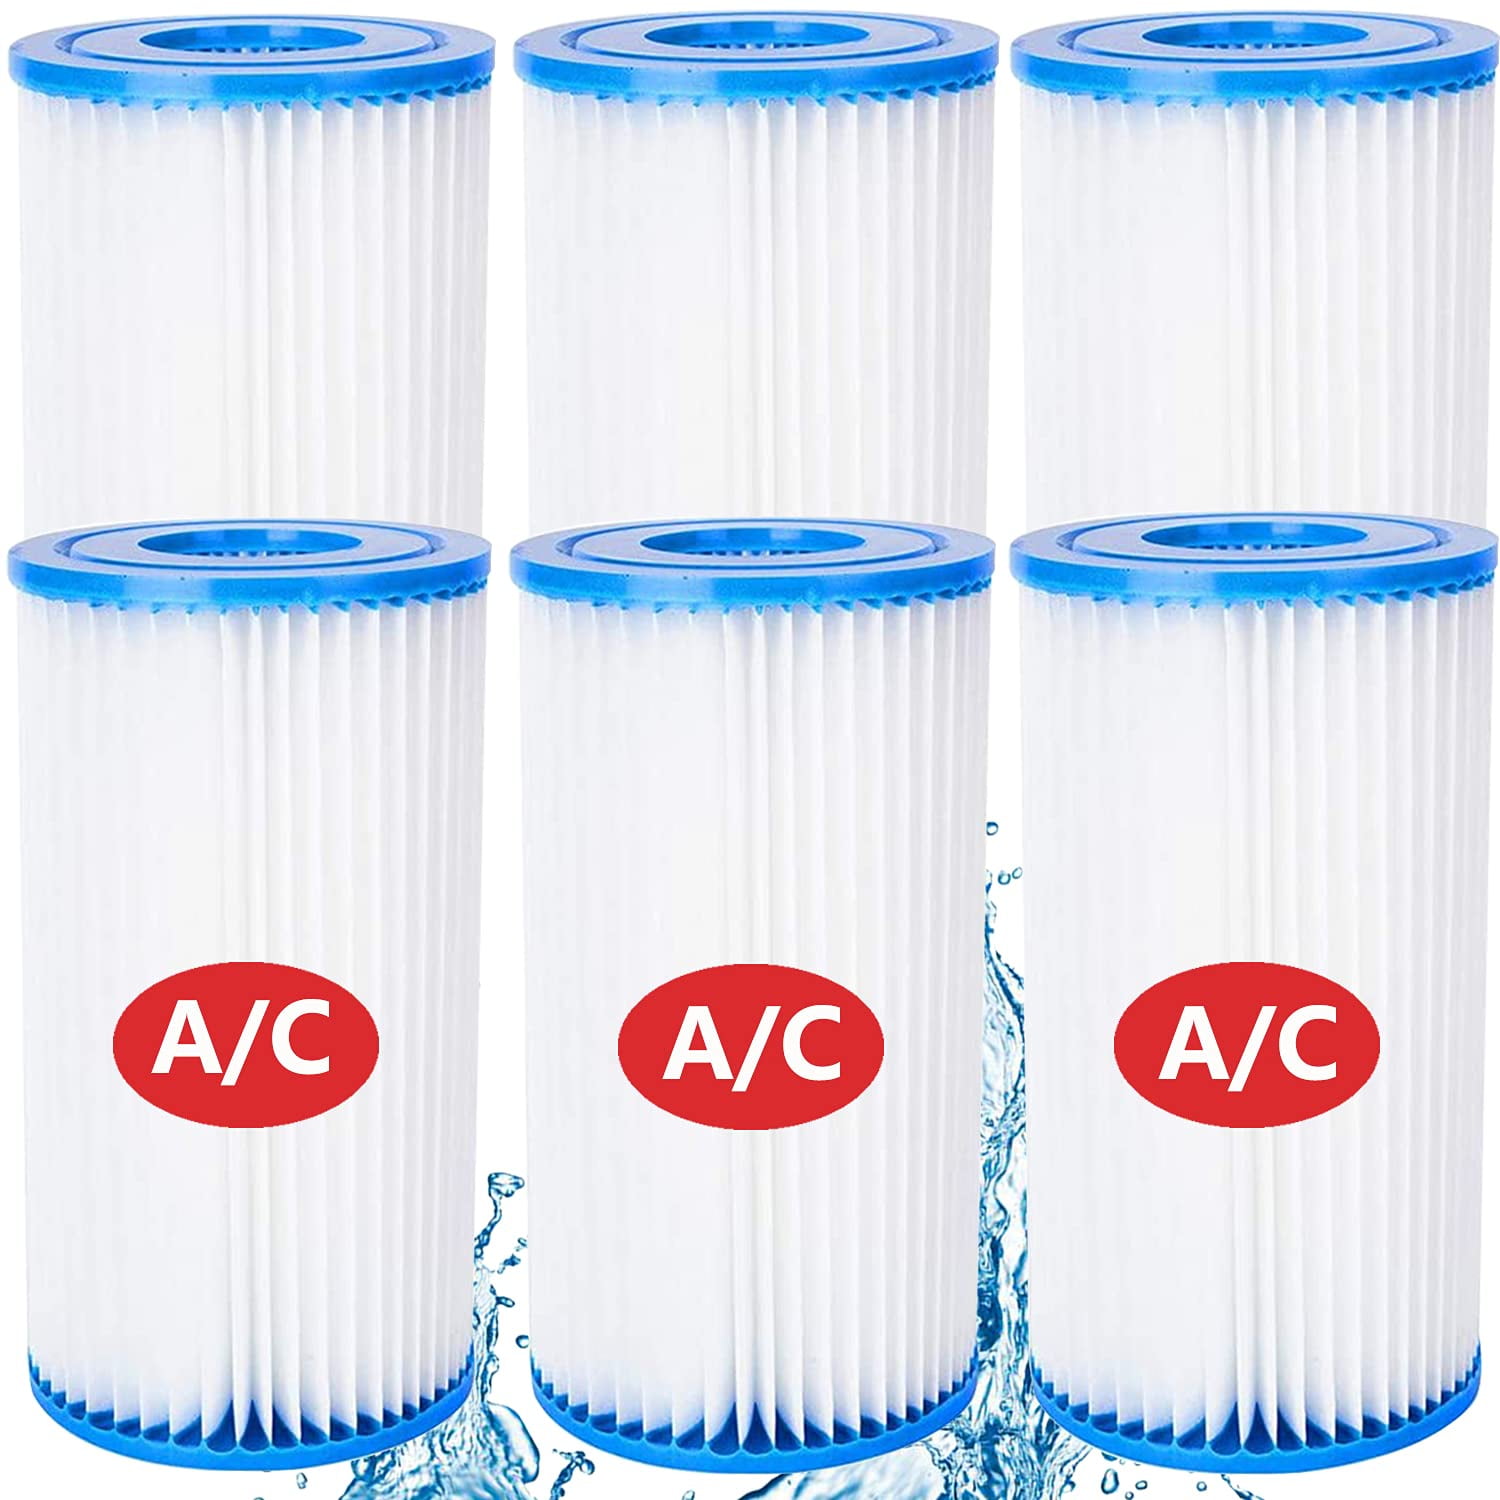 1x Summer Waves Escapes D Pool Filter Cartridge 3.8" X 4.2" RX600 For Typ-D NEW 